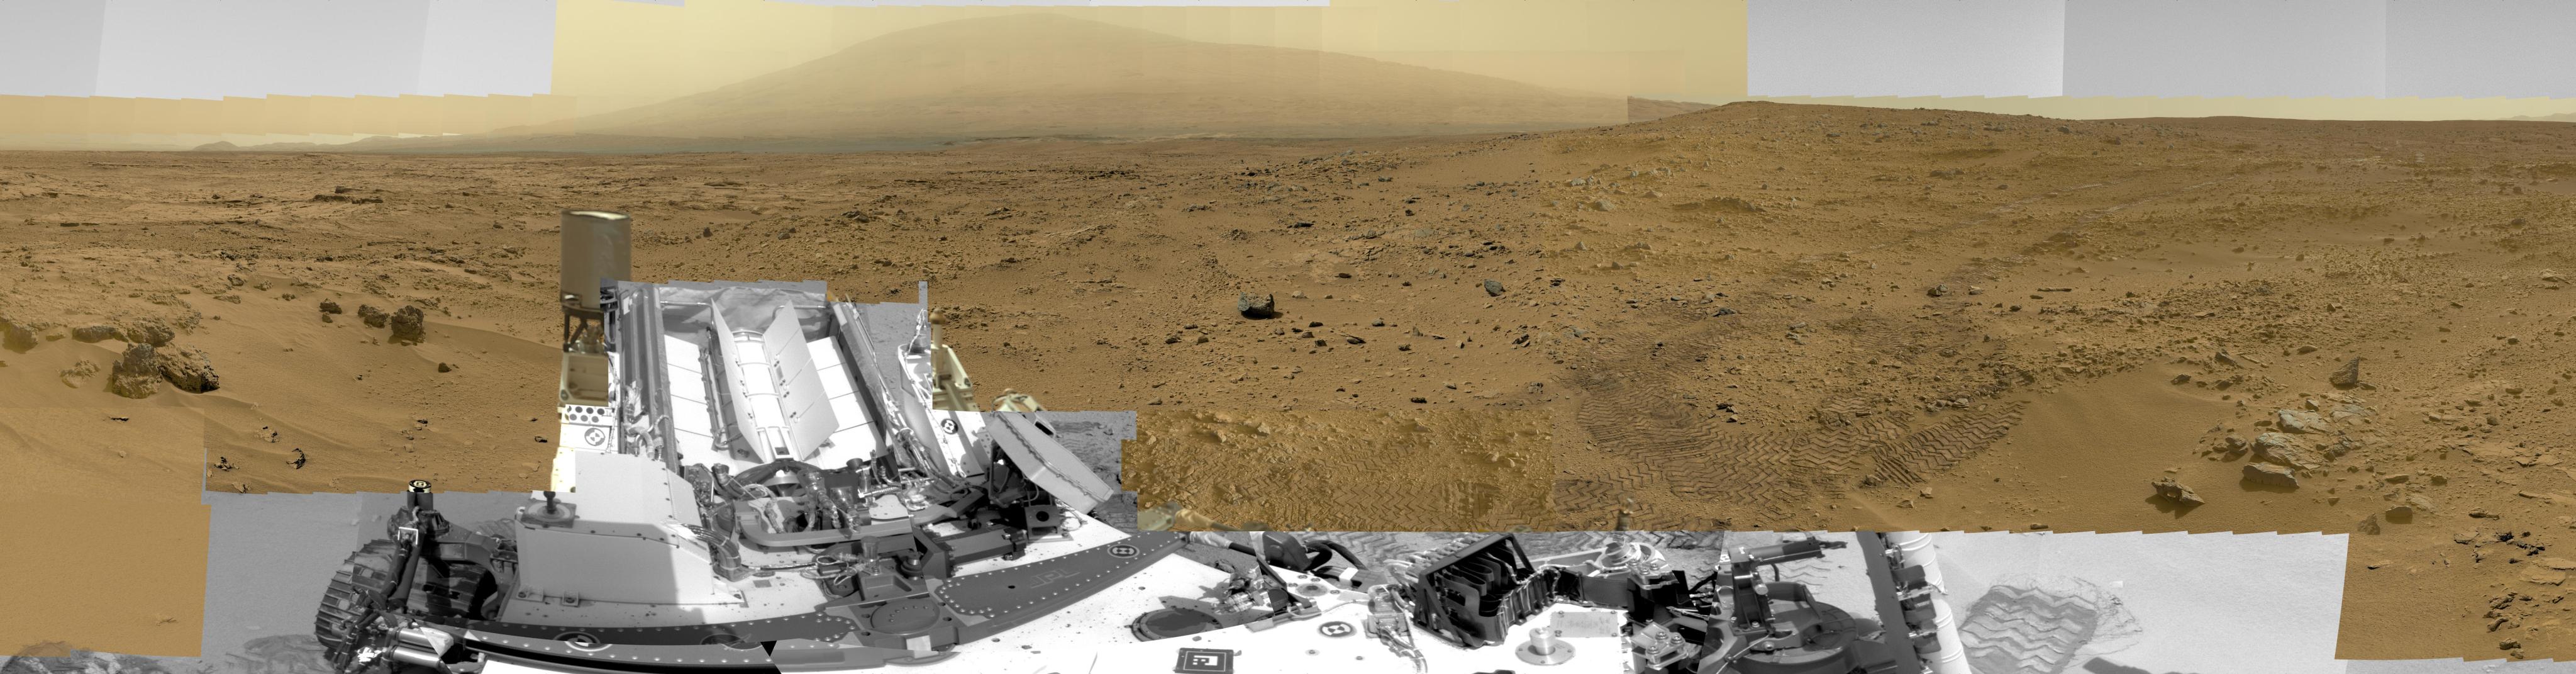 This full-circle view combined nearly 900 images taken by NASA's Curiosity Mars rover, generating a panorama with 1.3 billion pixels in the full-resolution version.